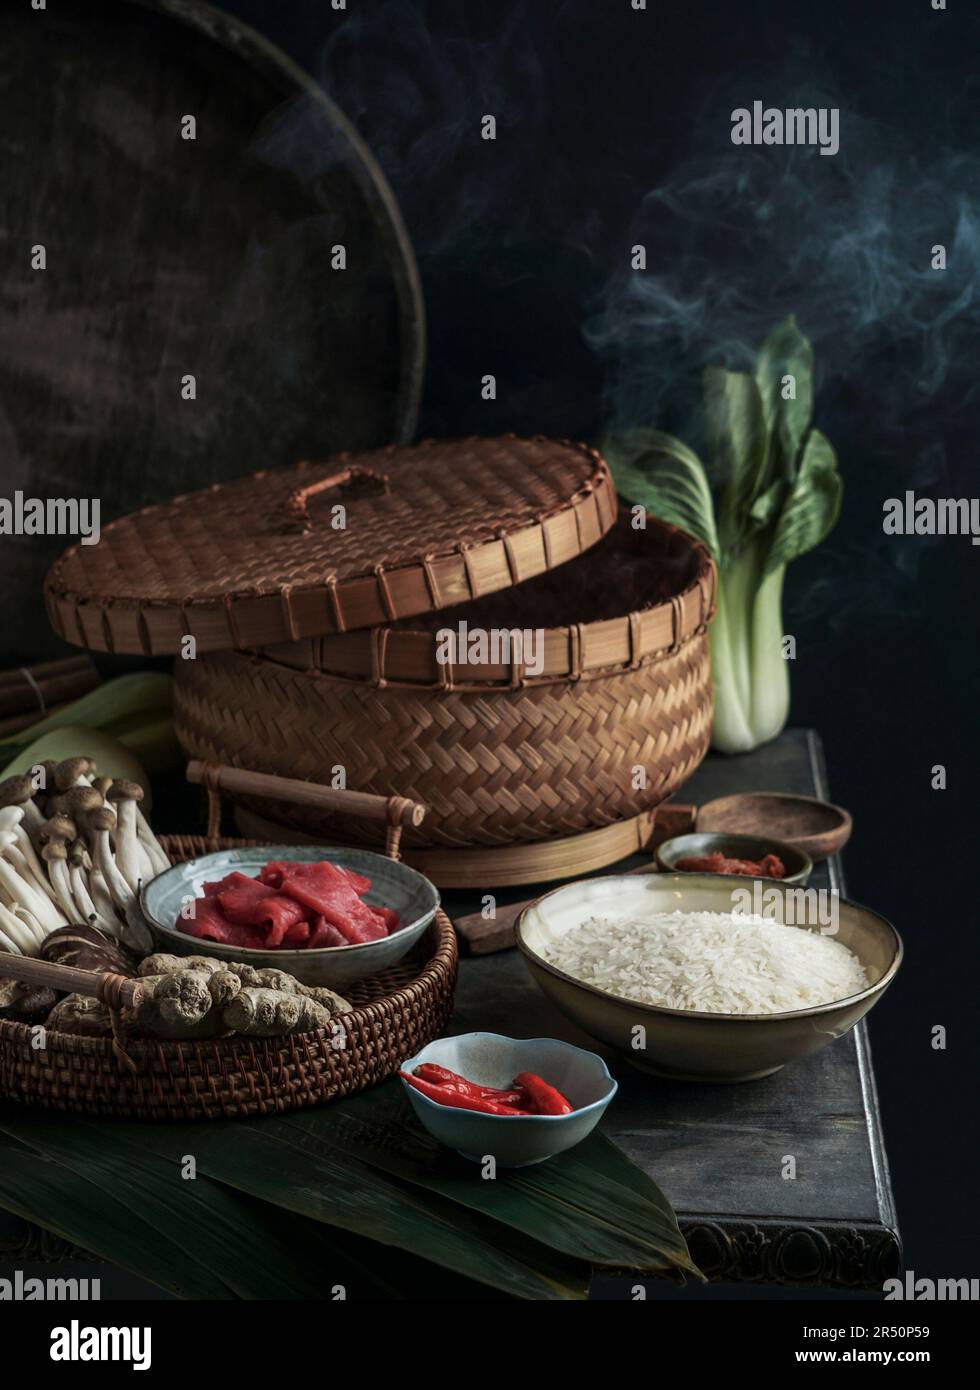 https://c8.alamy.com/comp/2R50P59/ingredients-for-asian-cuisine-in-a-bamboo-steamer-2R50P59.jpg